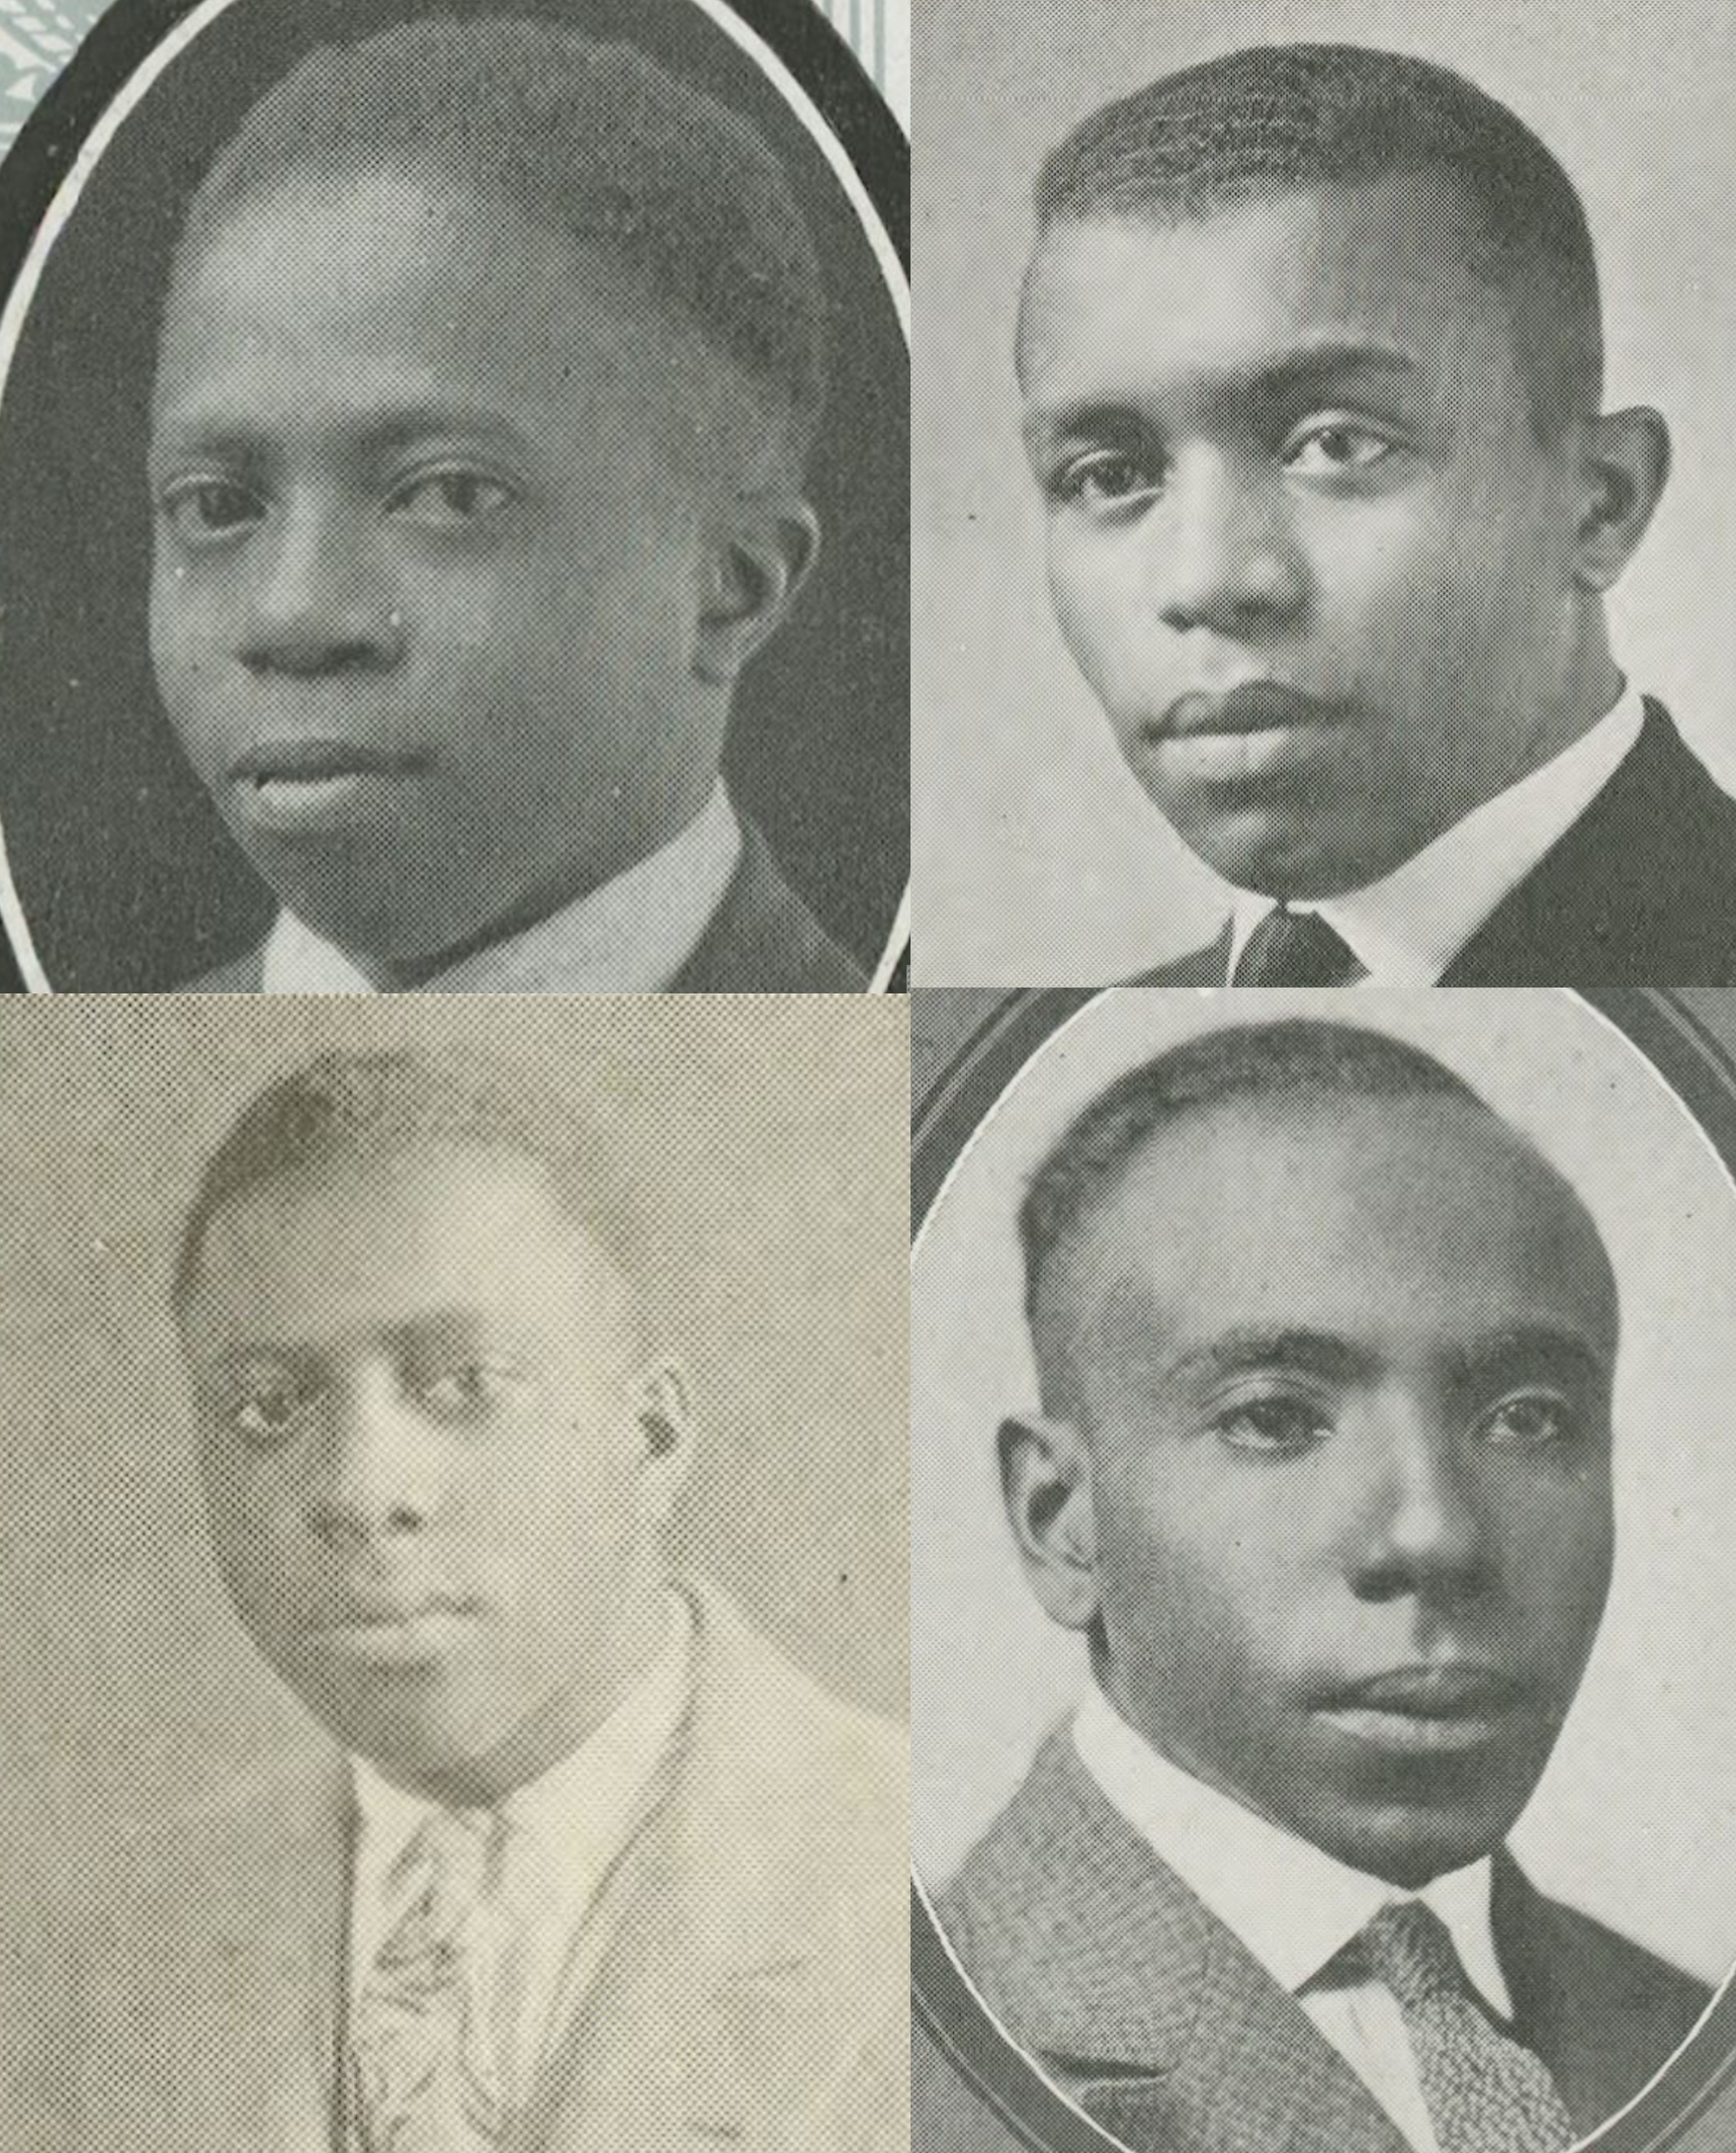 Clockwise from top left: Hermanze Edwin Fauntleroy, Clinton Edward Shaw, Julius Lee Morgan and Clyde Silance.